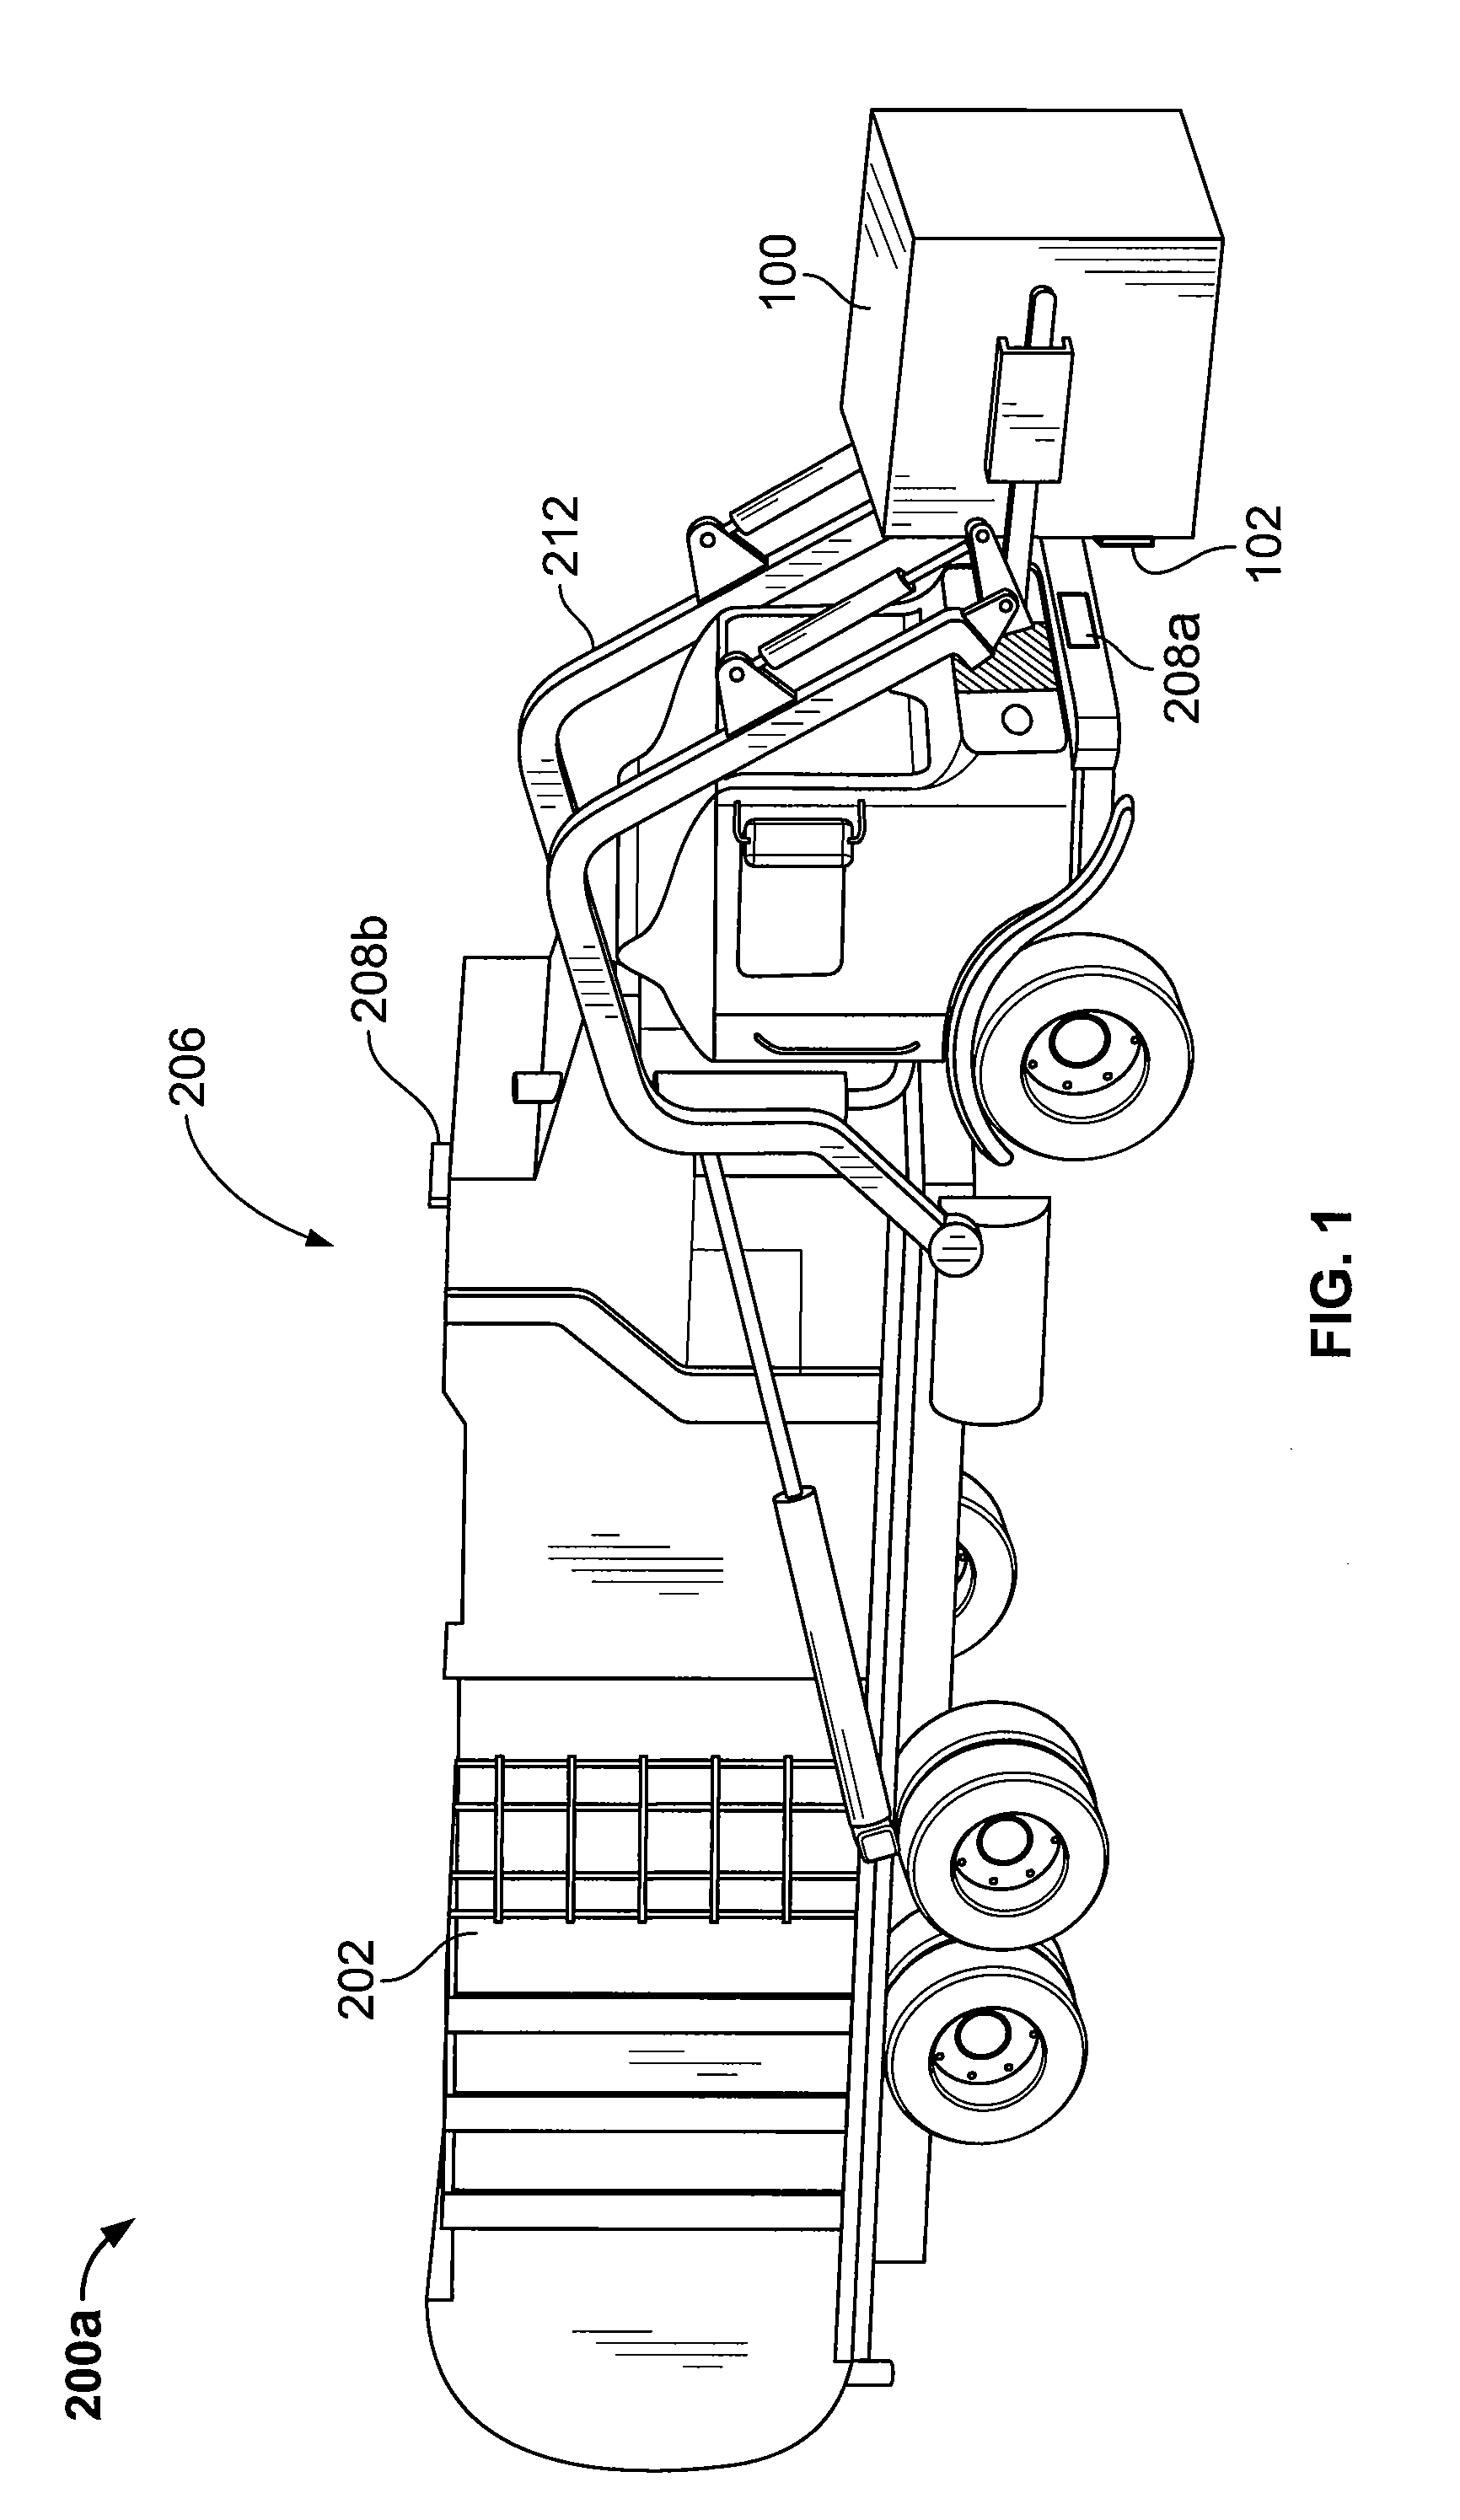 Method and apparatus for monitoring waste removal and administration